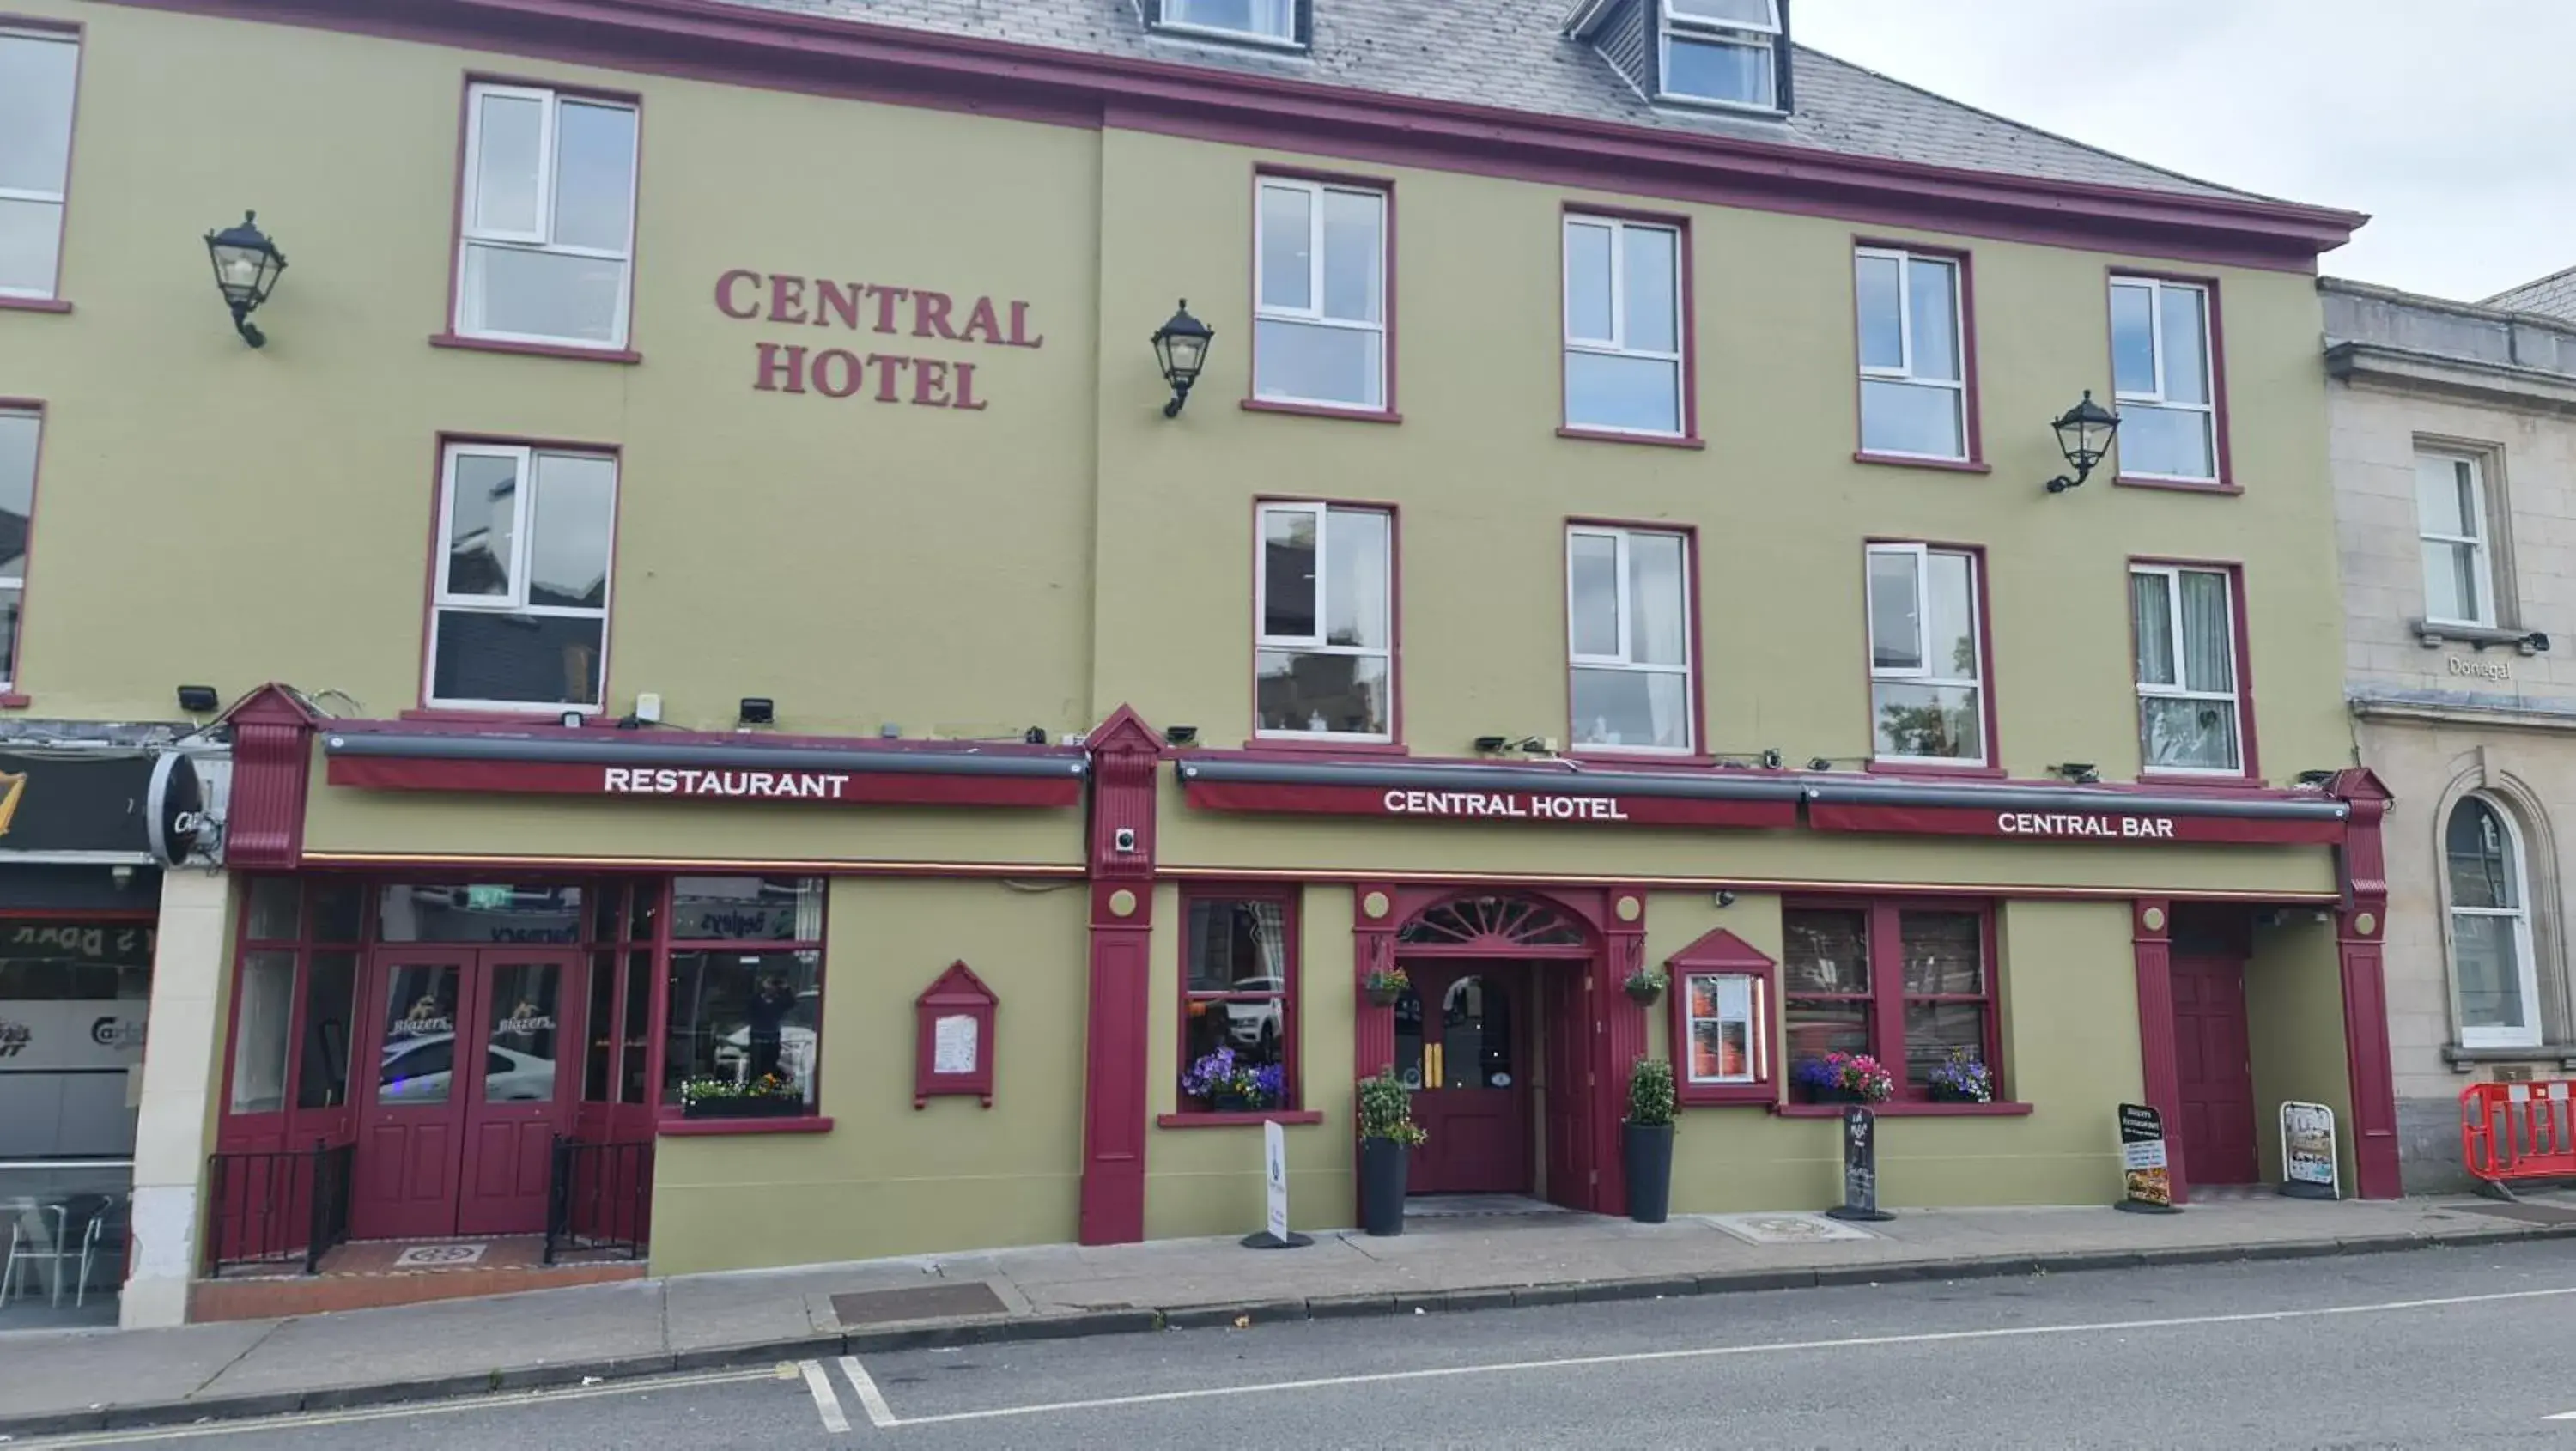 Property Building in Central Hotel Donegal